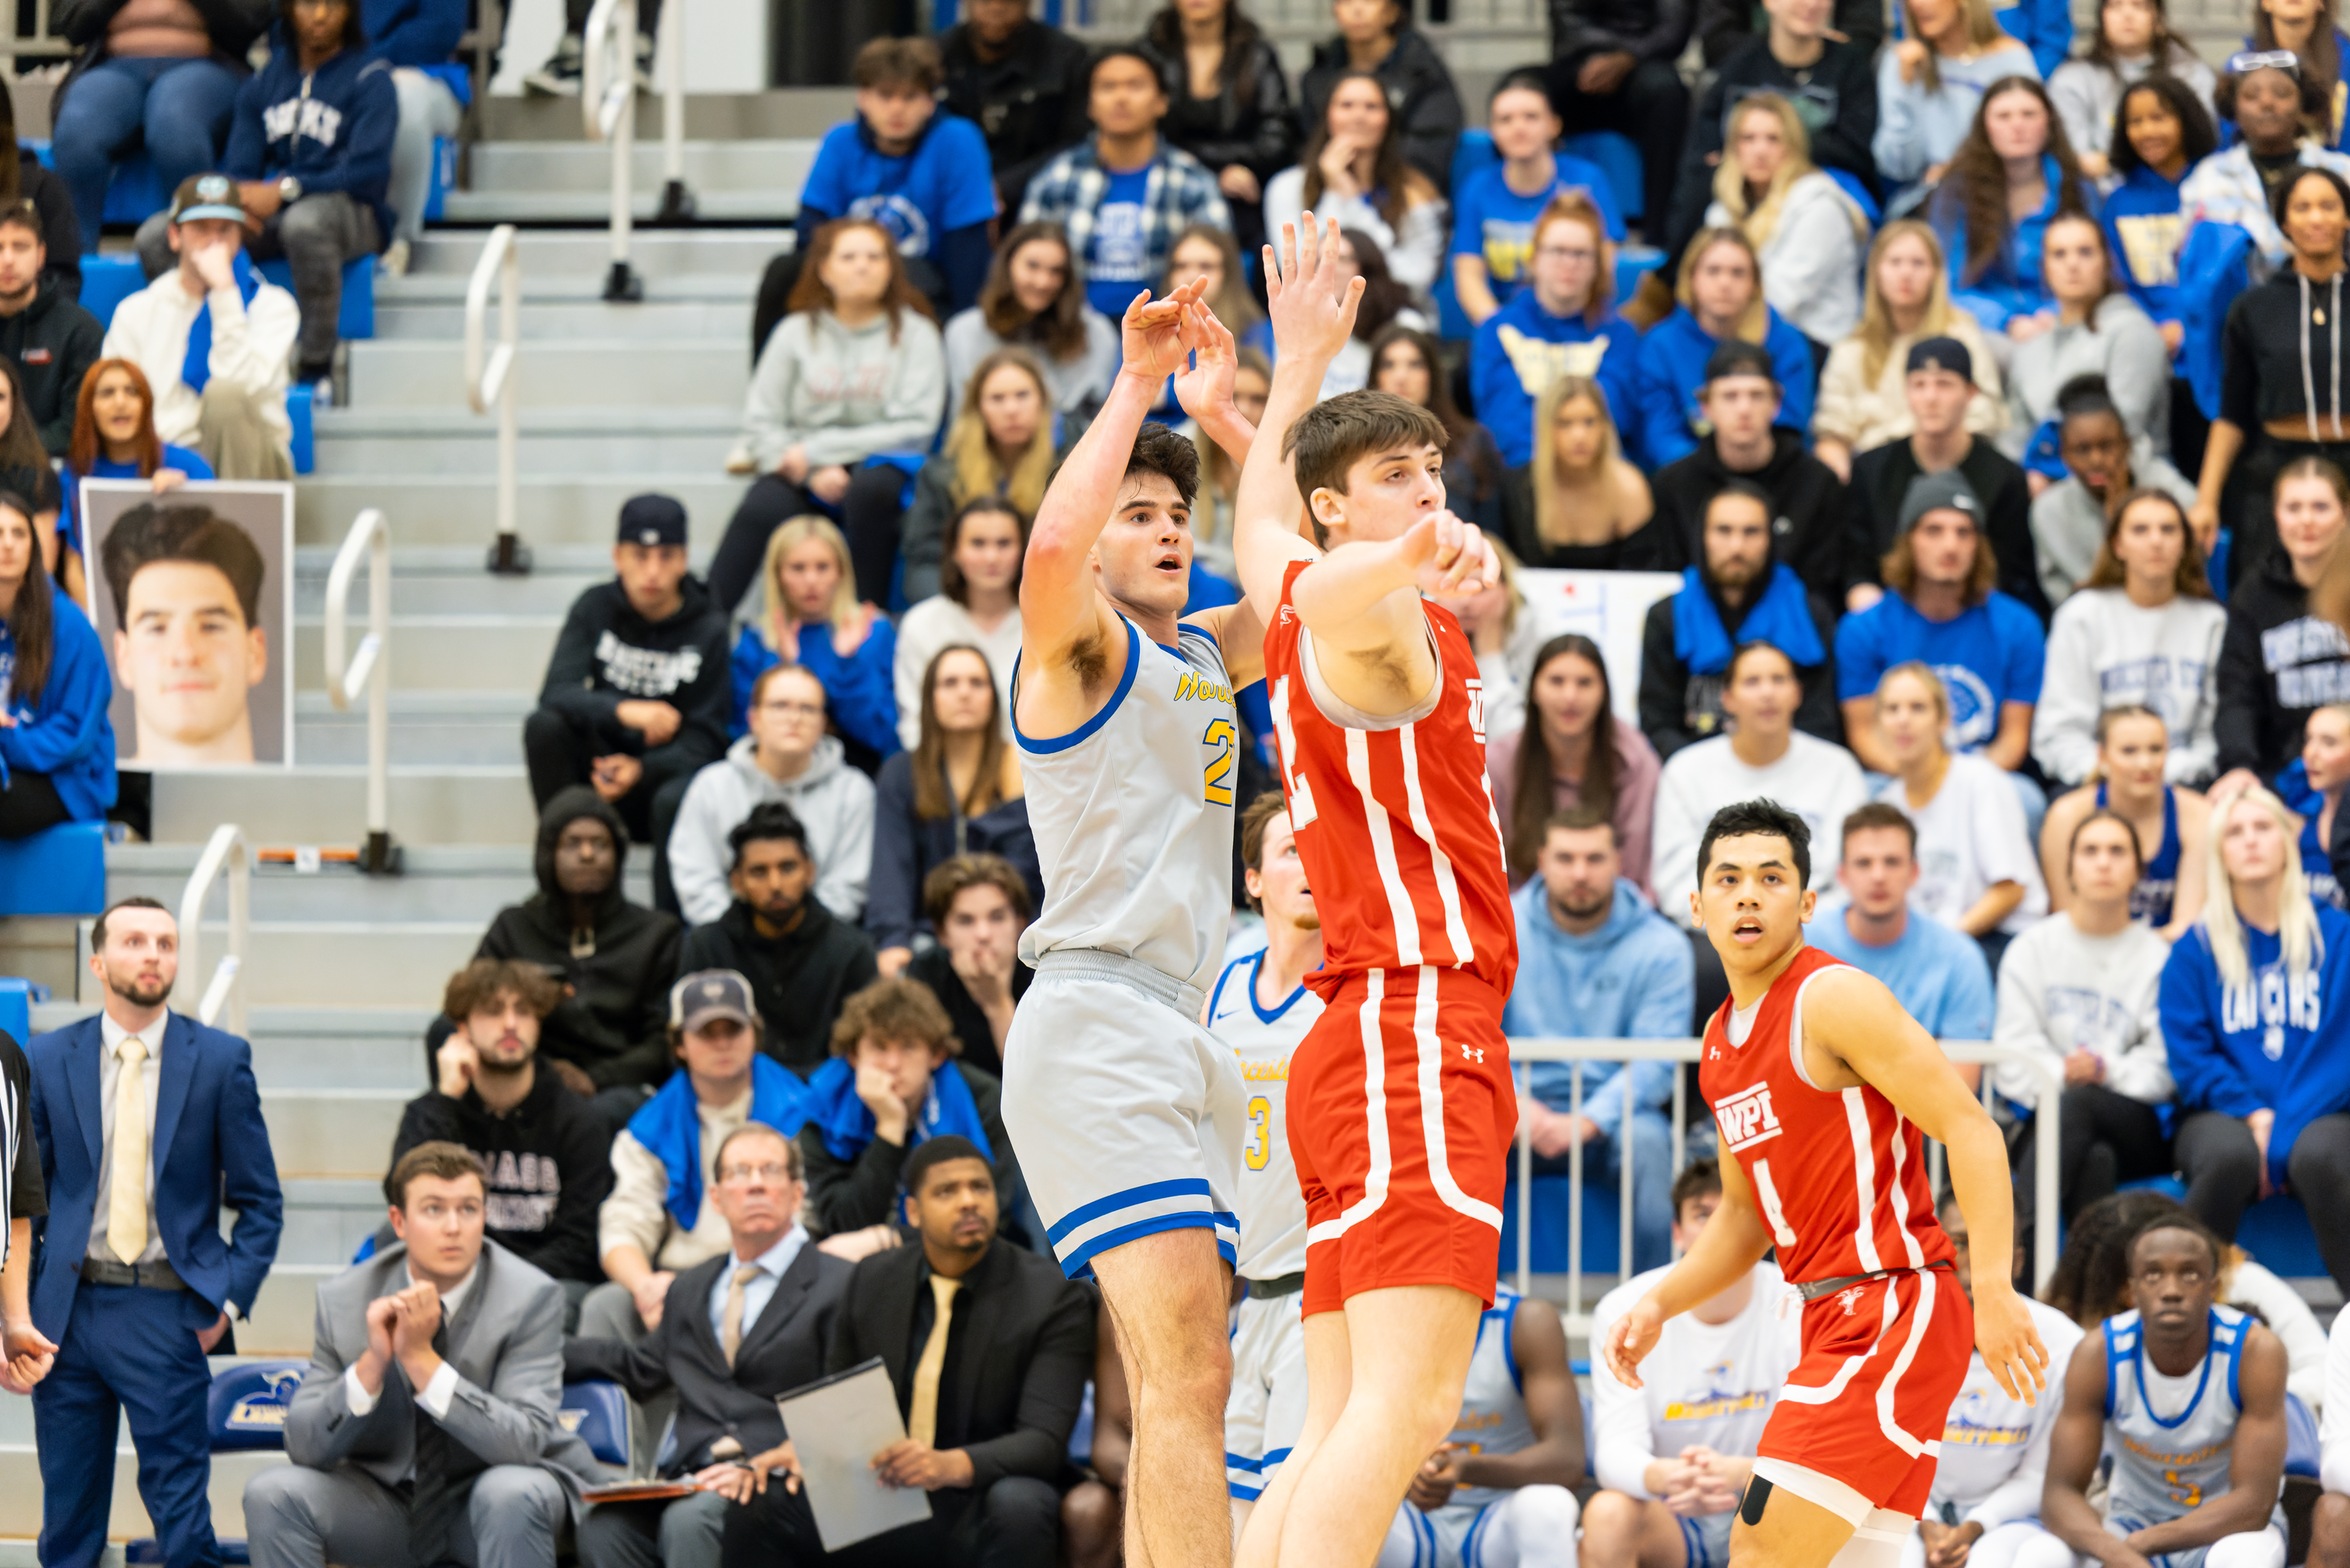 Lancers Remain Undefeated in MASCAC Play, Overcoming Bears in Second Half Comeback